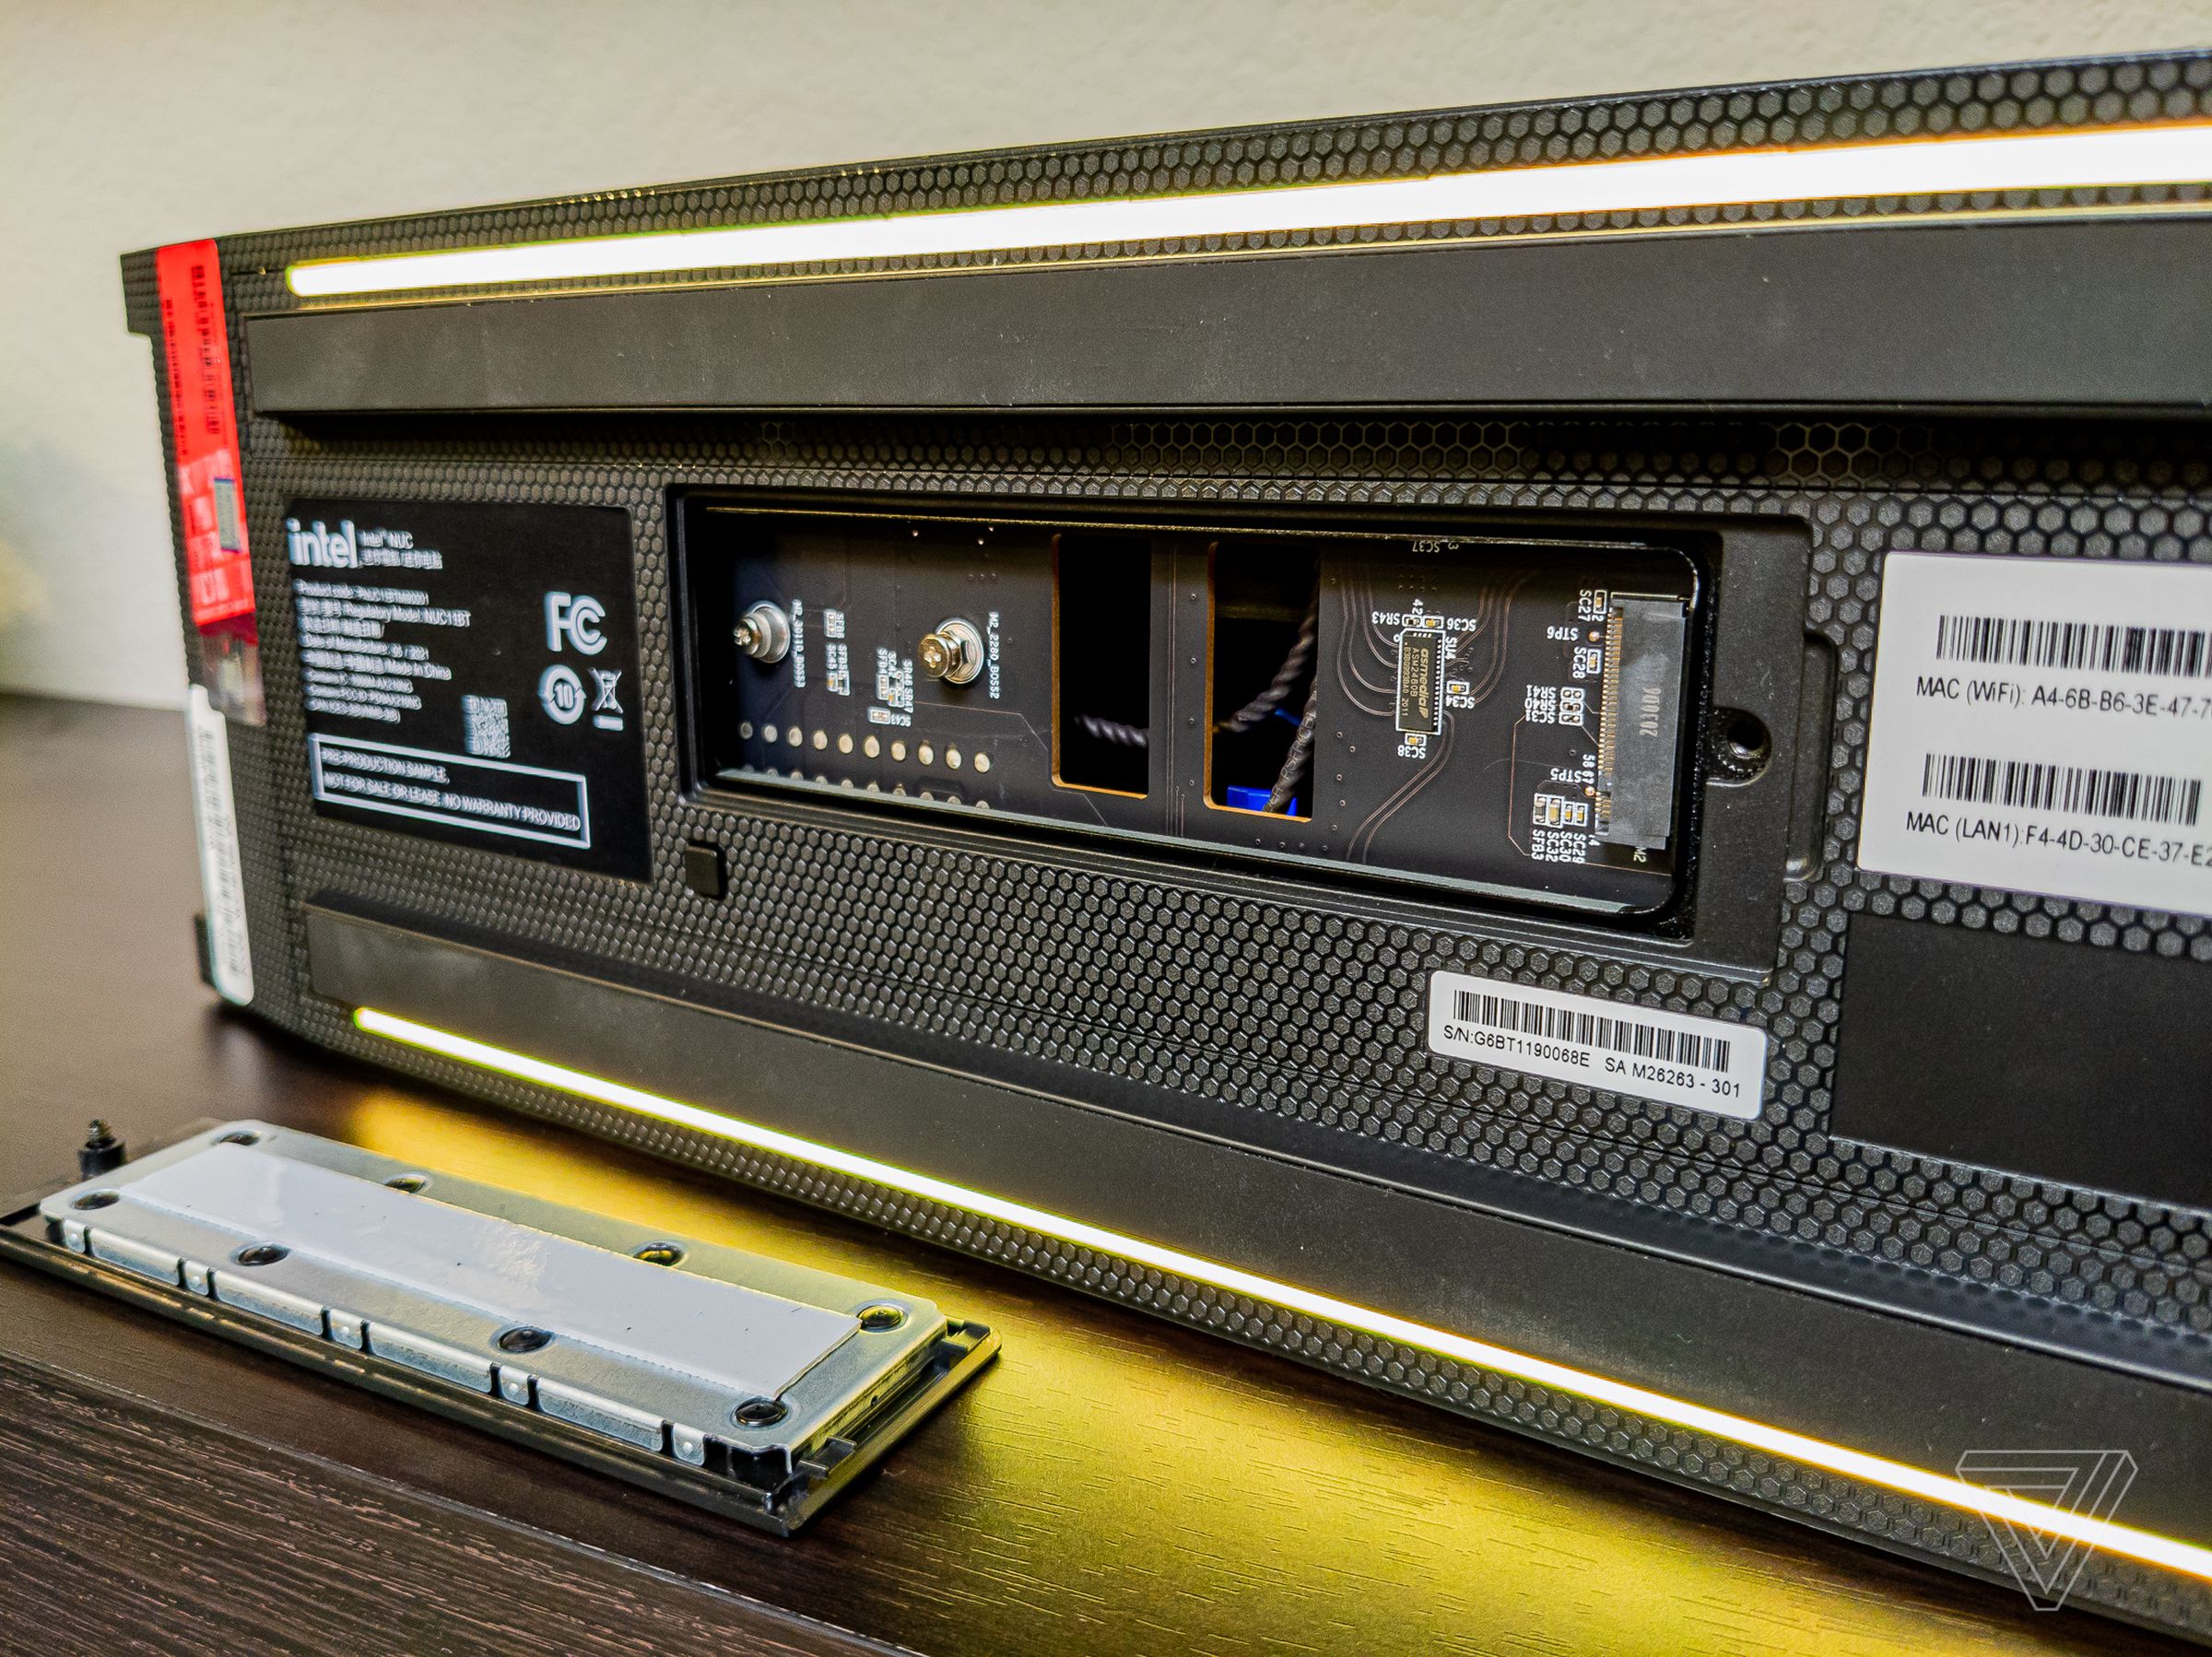 The extra-long 110mm PCIe NVMe Gen 4 drive slot, and a button to turn off the LED lighting.